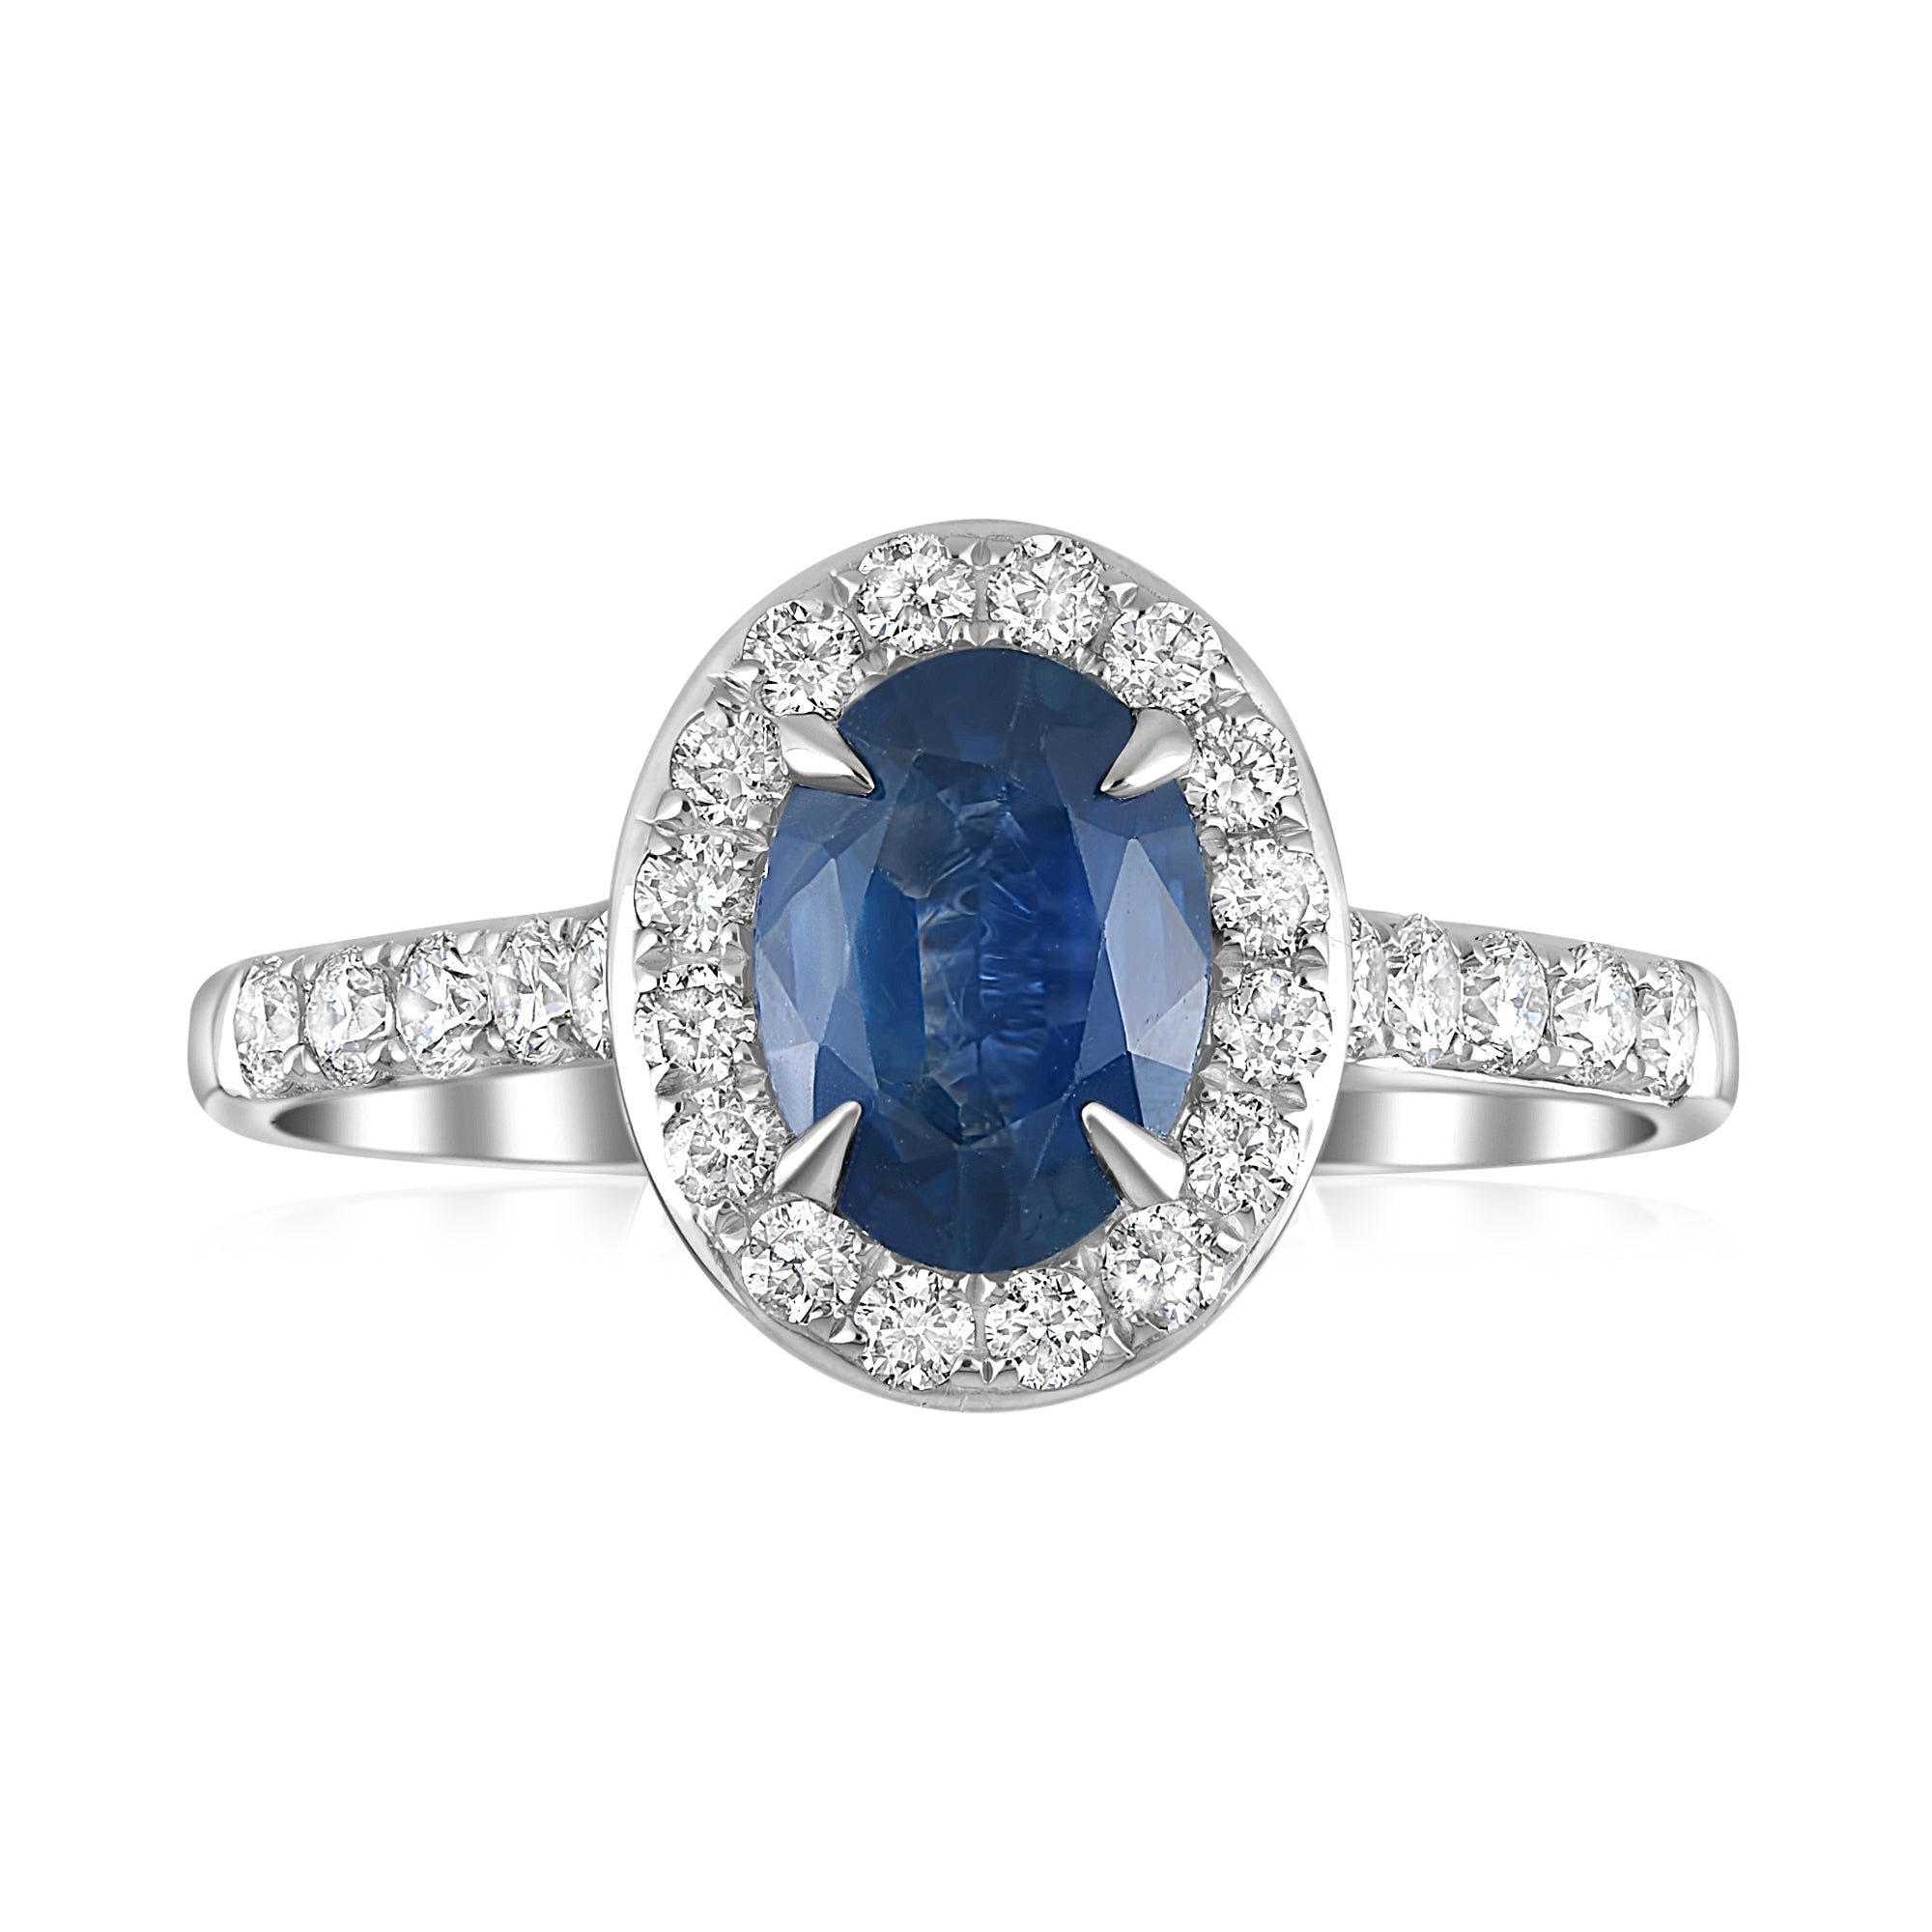 1.31ct sapphire & diamond ring set in a 18ct white gold halo